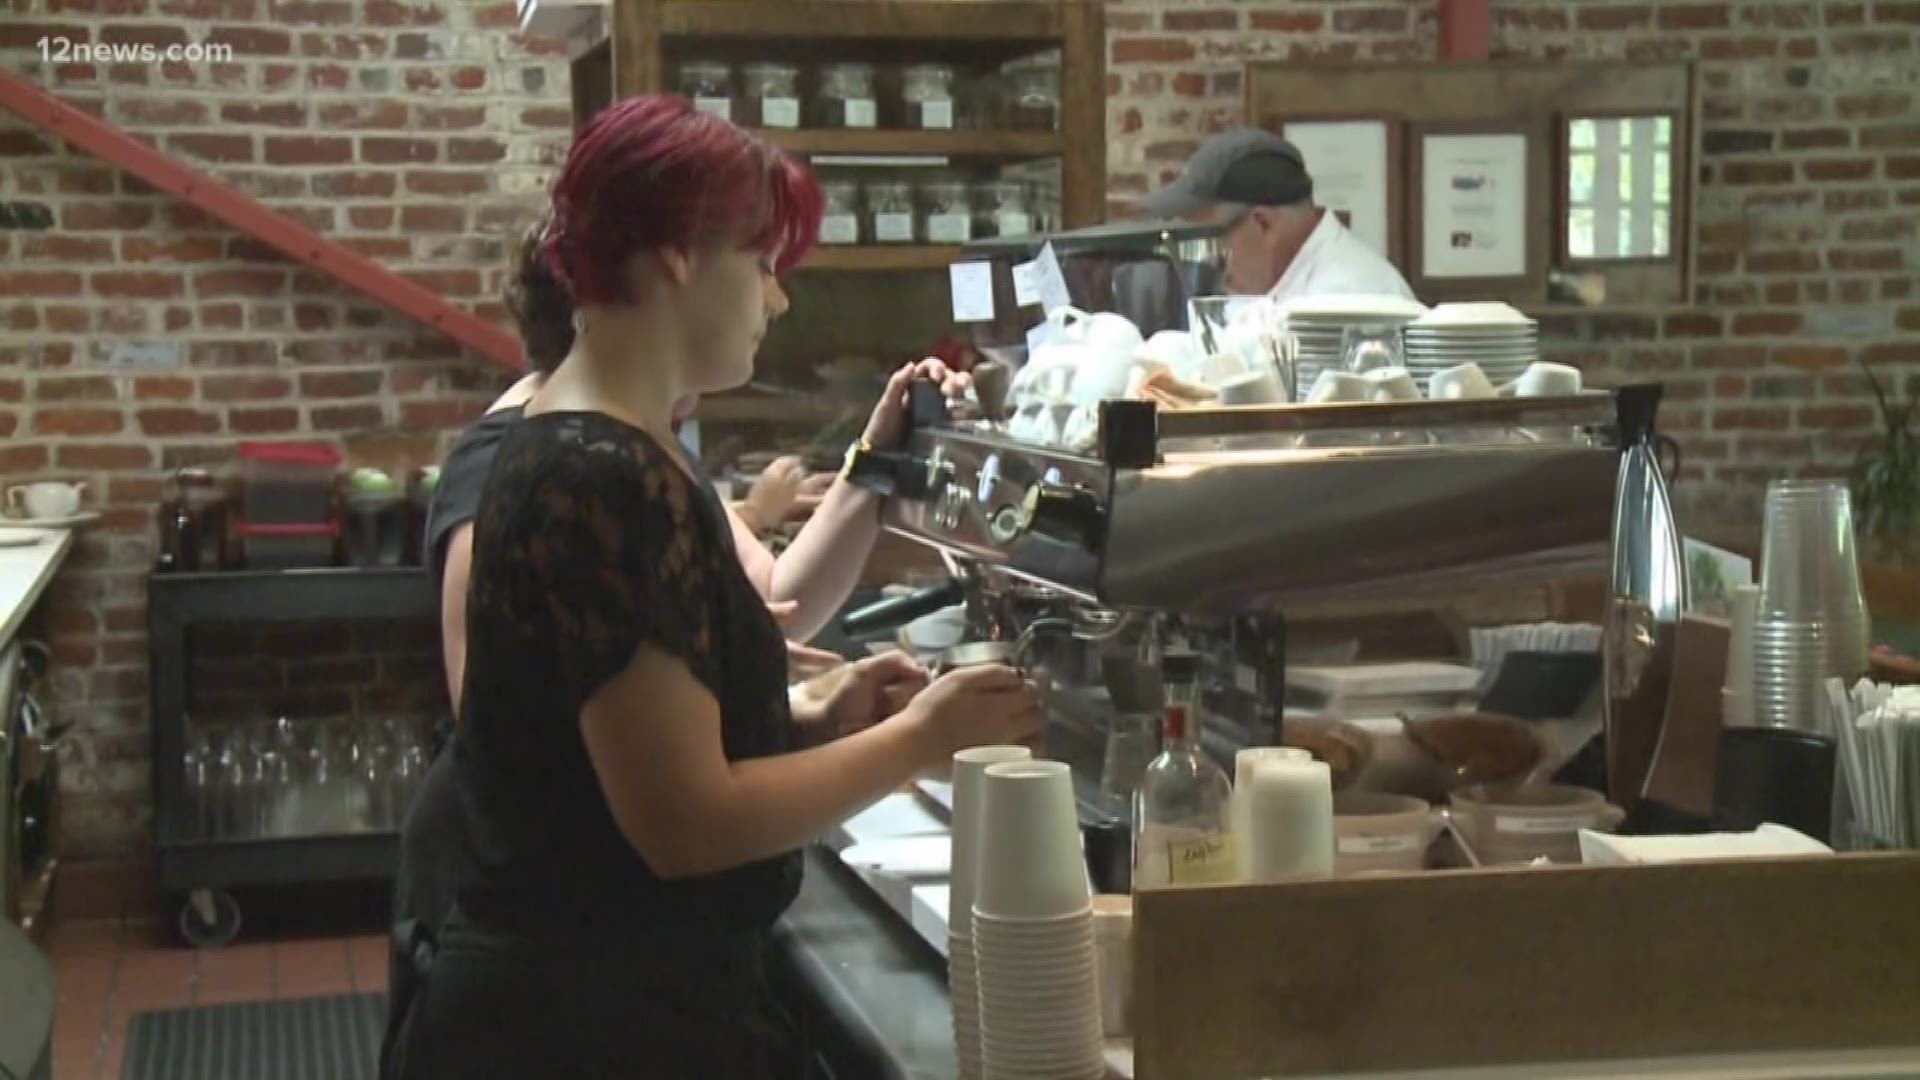 A bill that would create two minimum wages is under consideration in the Arizona Legislature. The bill would allow employers to pay full-time college students between the ages of 18 and 22, working 20 hours a week less than the state's current minimum wage.